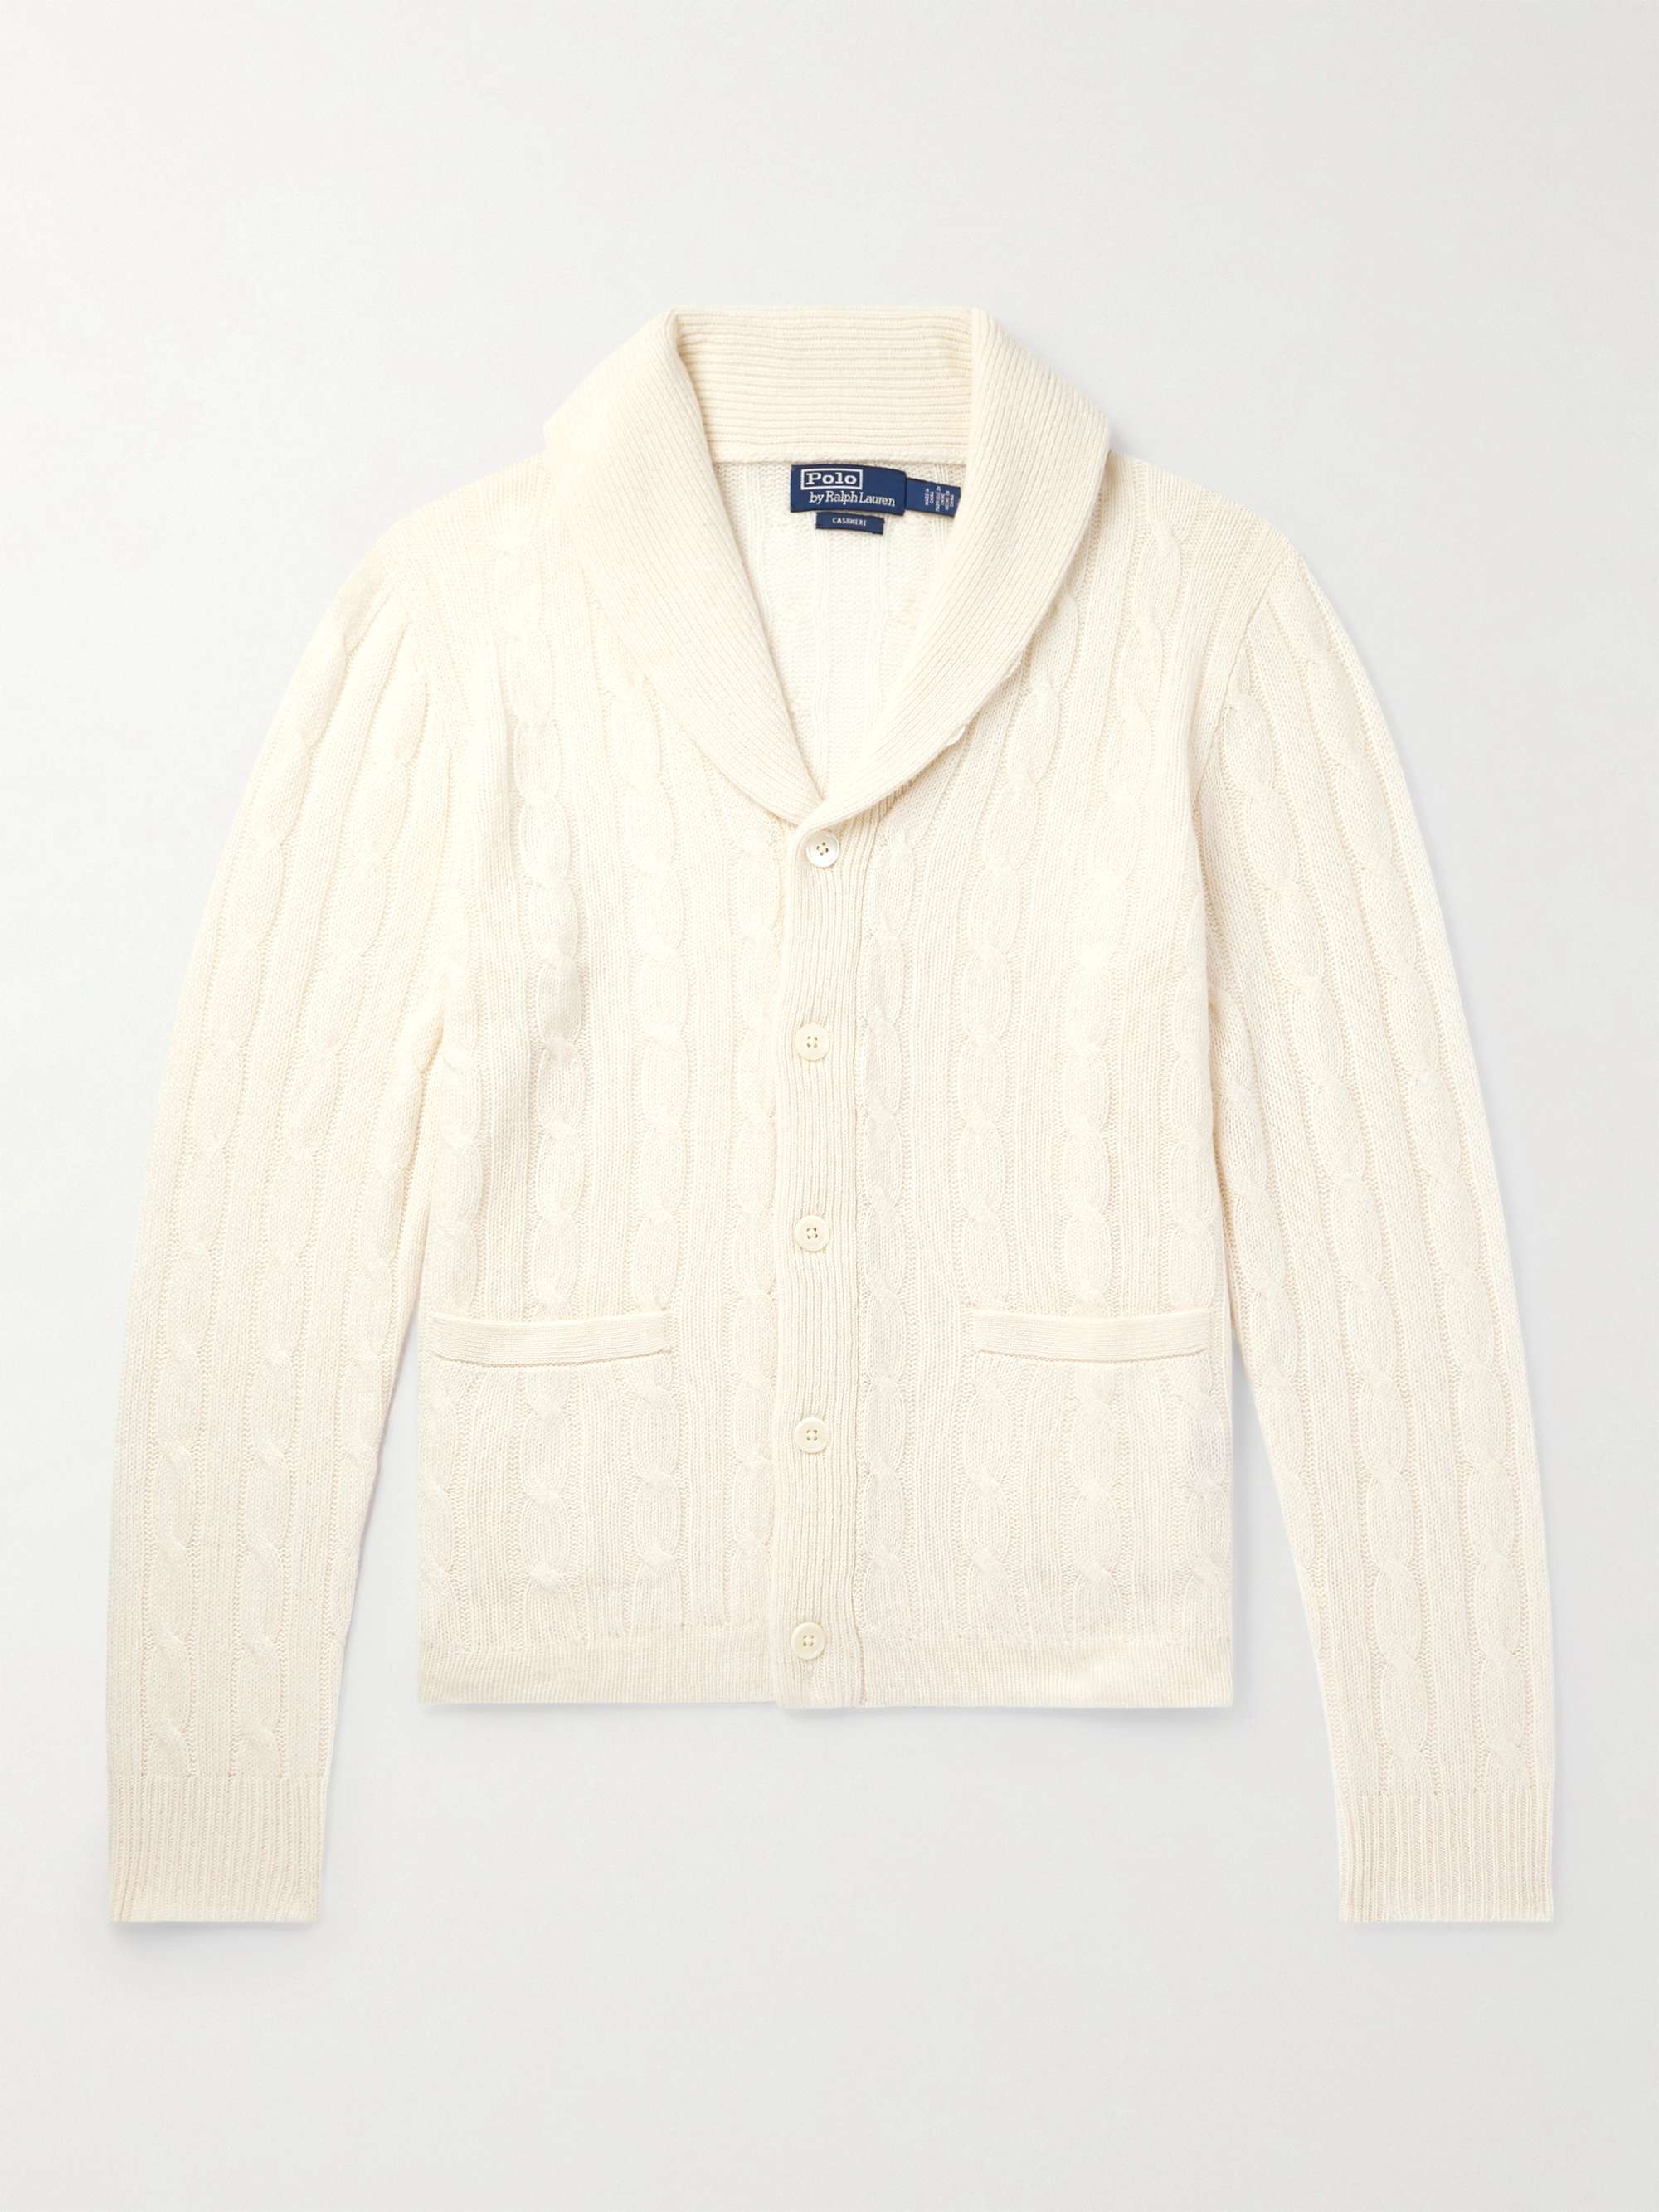 POLO RALPH LAUREN Shawl-Collar Cable-Knit Cashmere Cardigan for Men | MR  PORTER